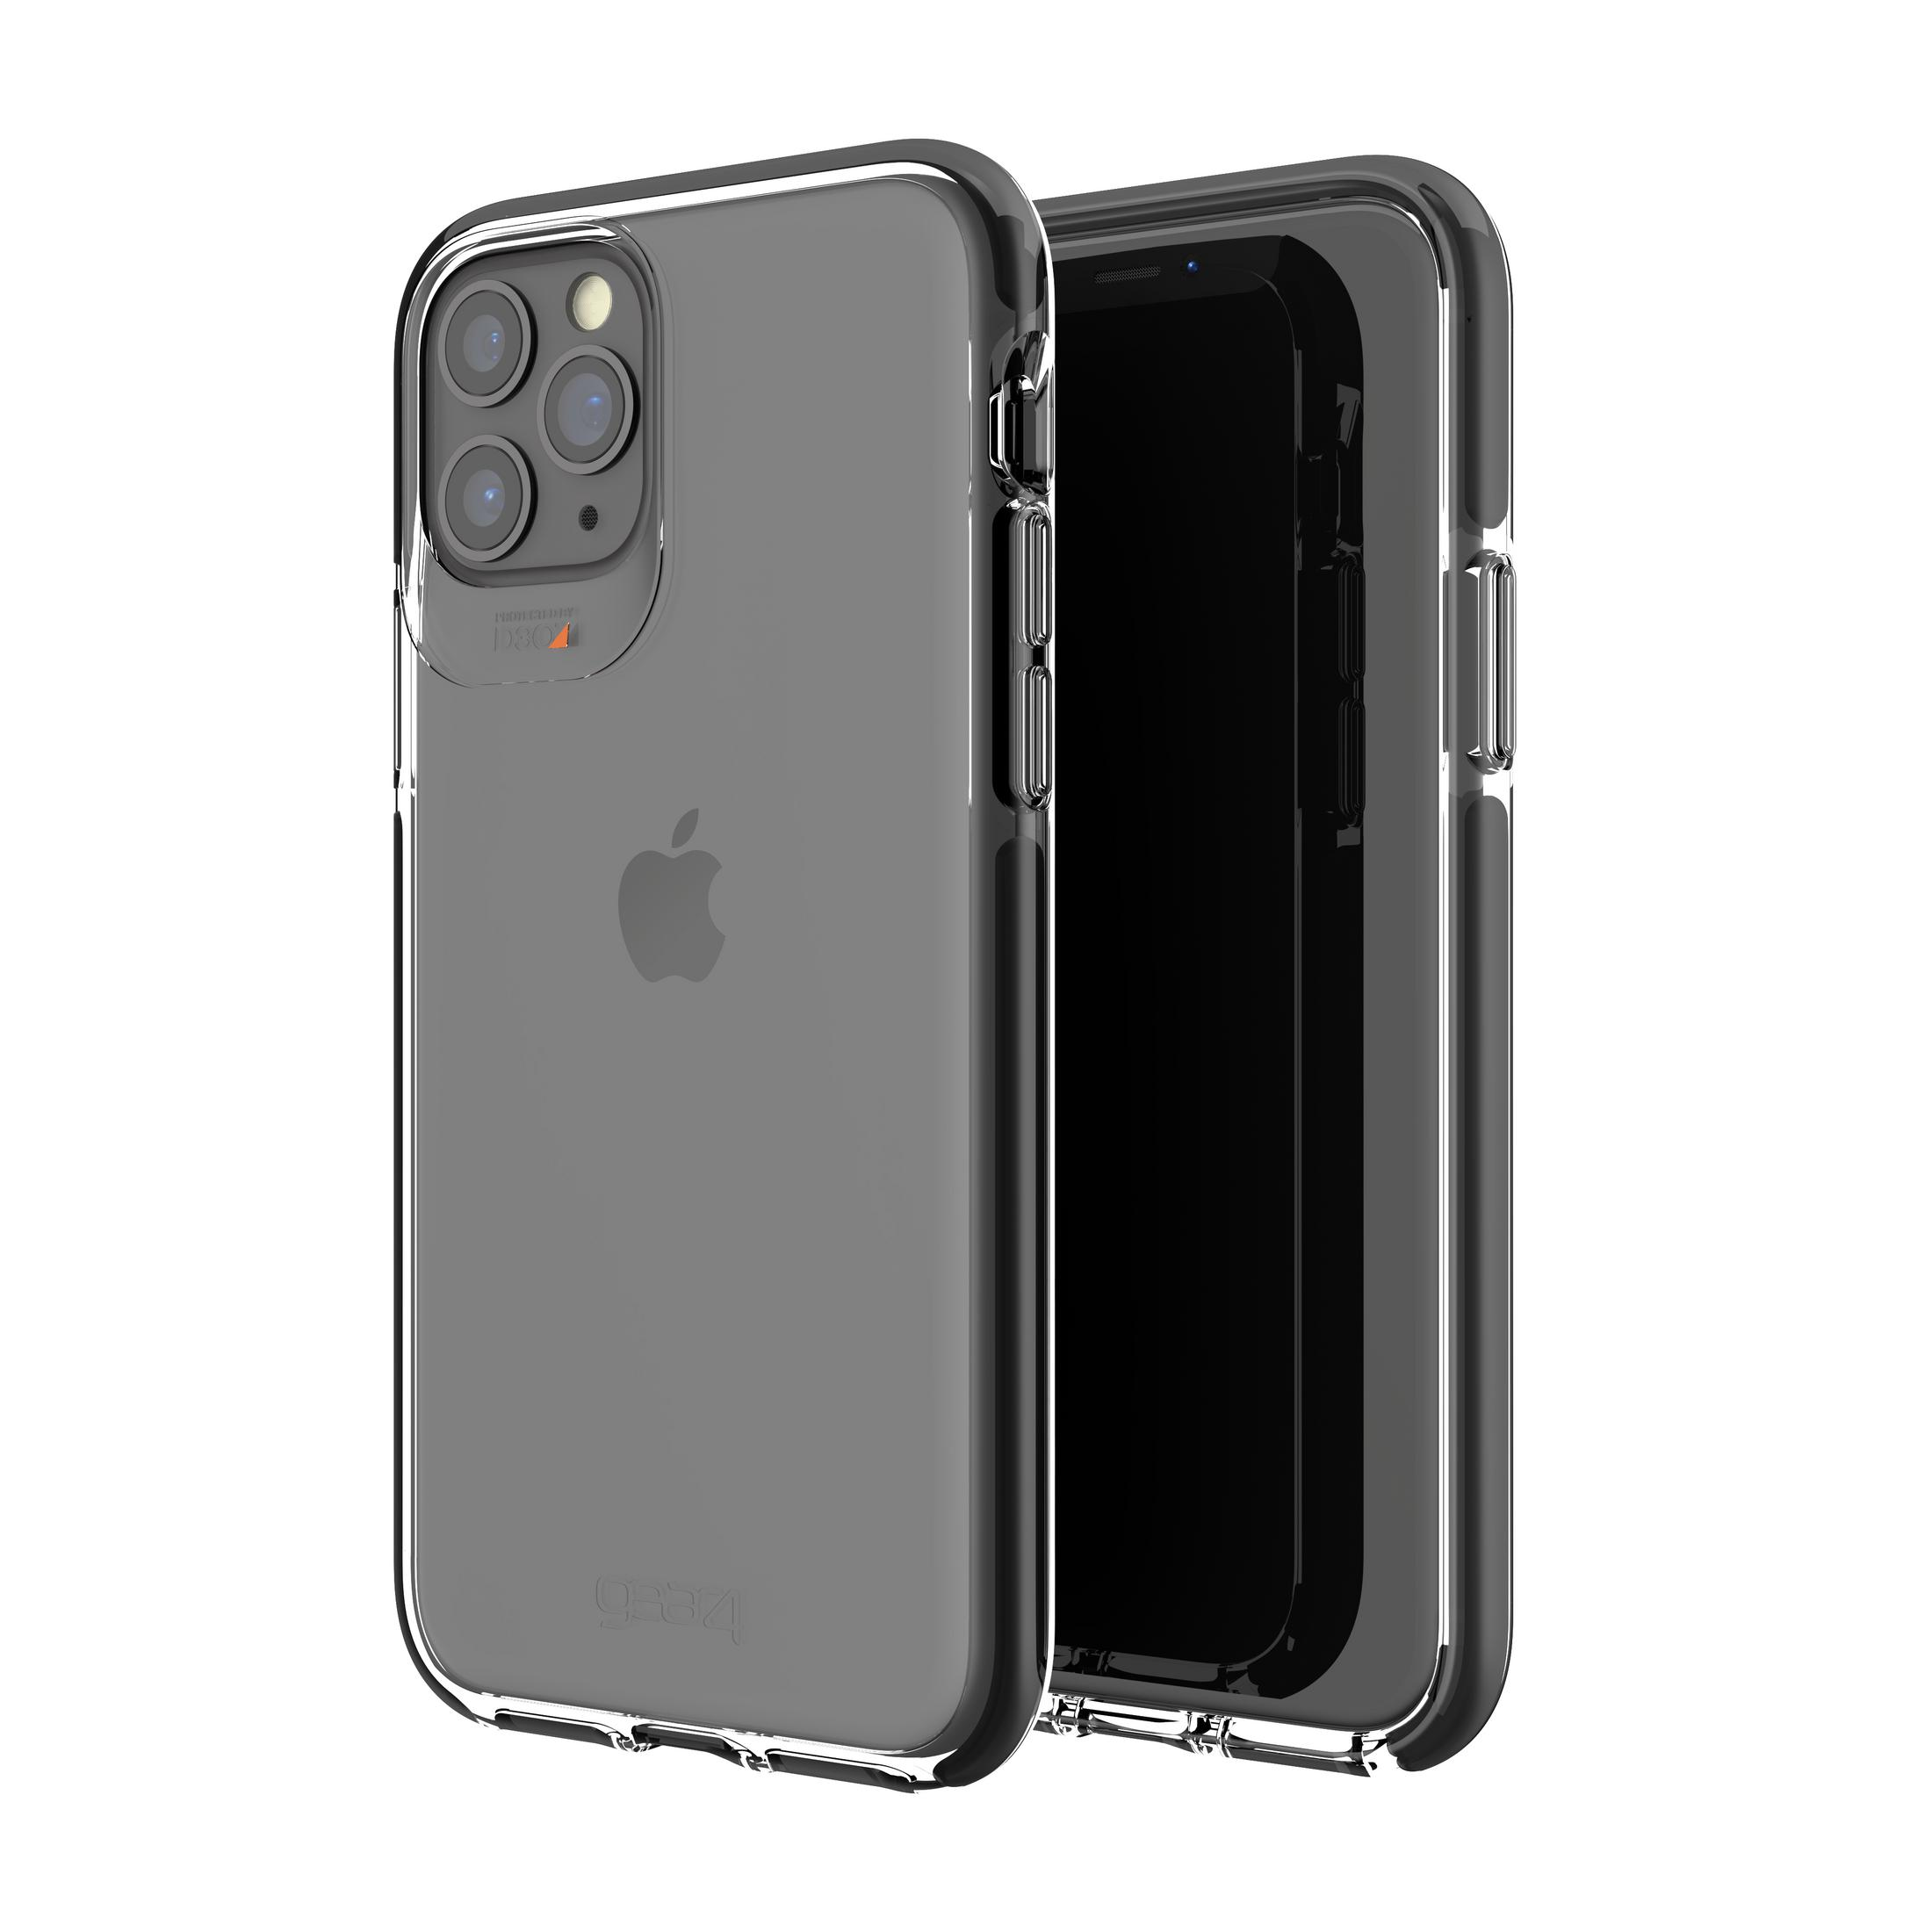 11 Backcover, GEAR4 0S32919 IPHONE Pro, Schwarz PRO (BLACK), PICCADILLY iPhone Apple, 11